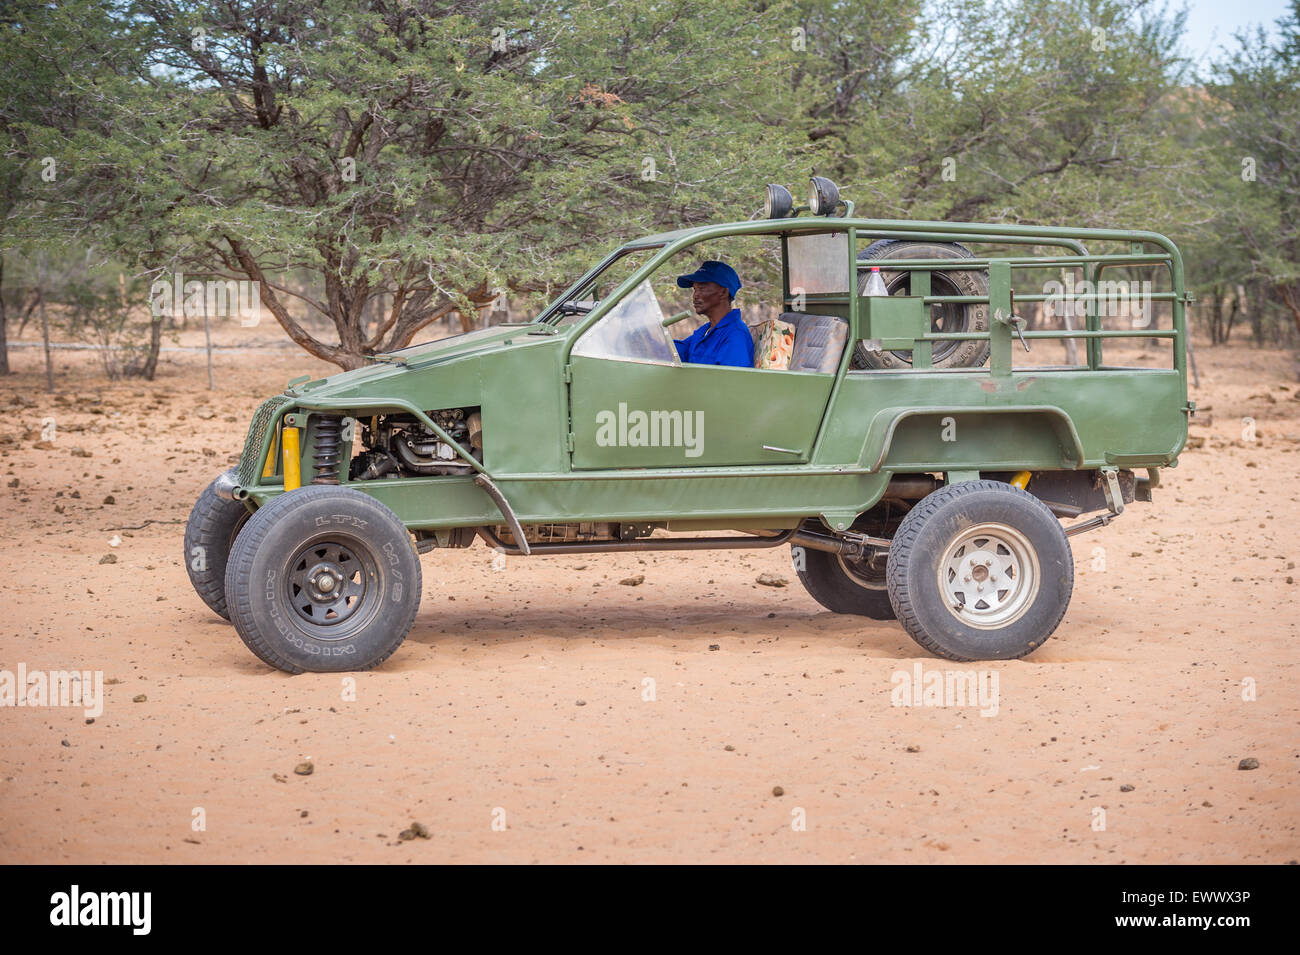 Namibia, Africa - Home made dune buggy riding on sheep farm Stock Photo